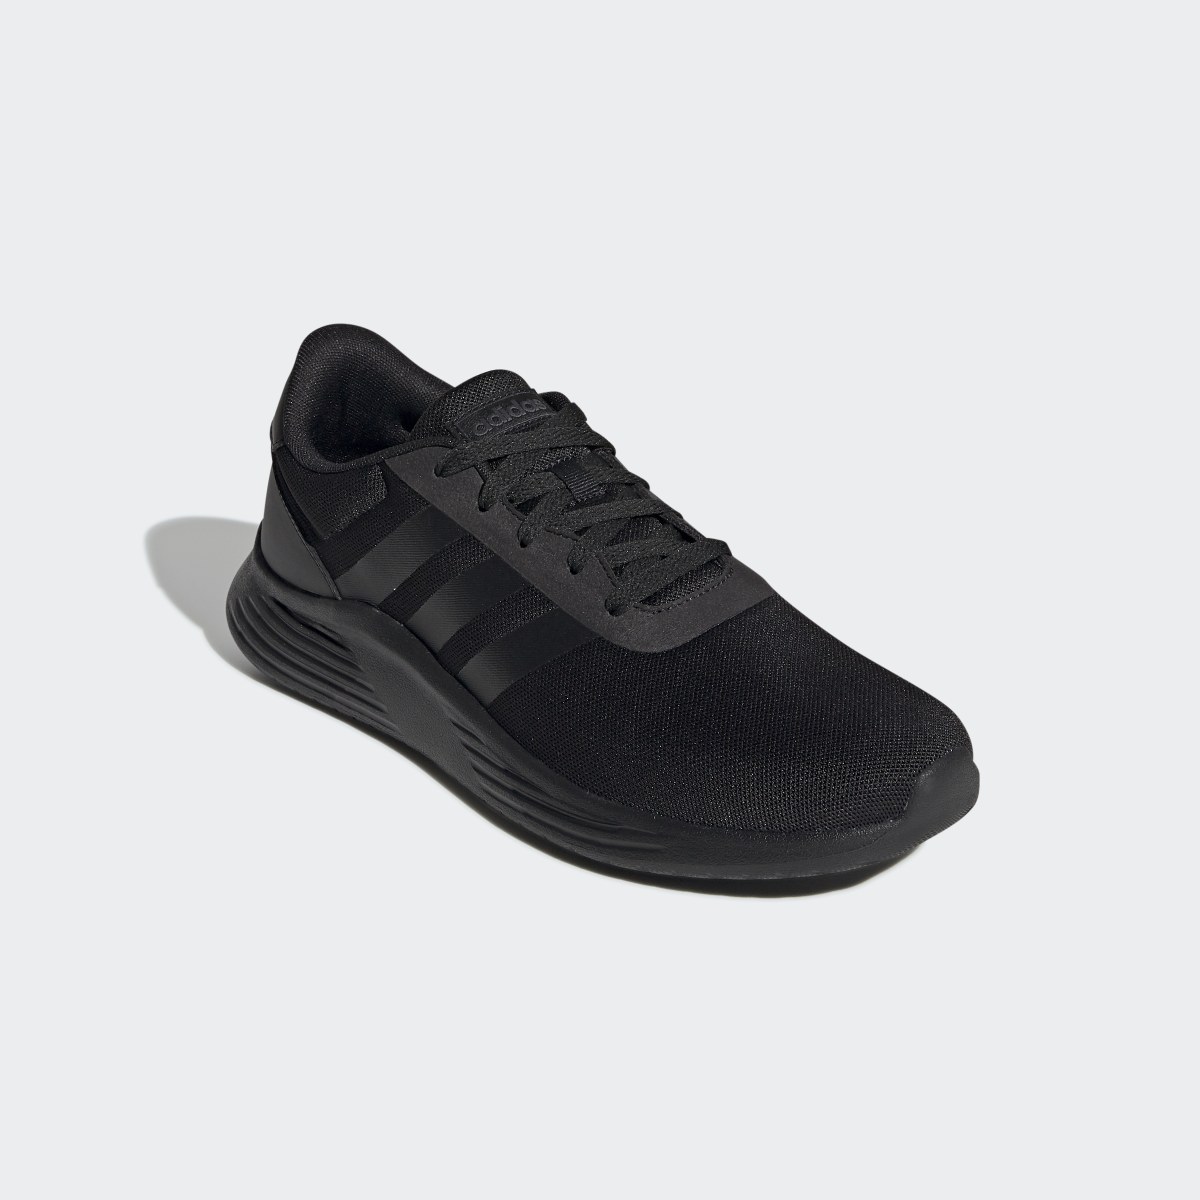 Adidas Lite Racer 2.0 Shoes. 5